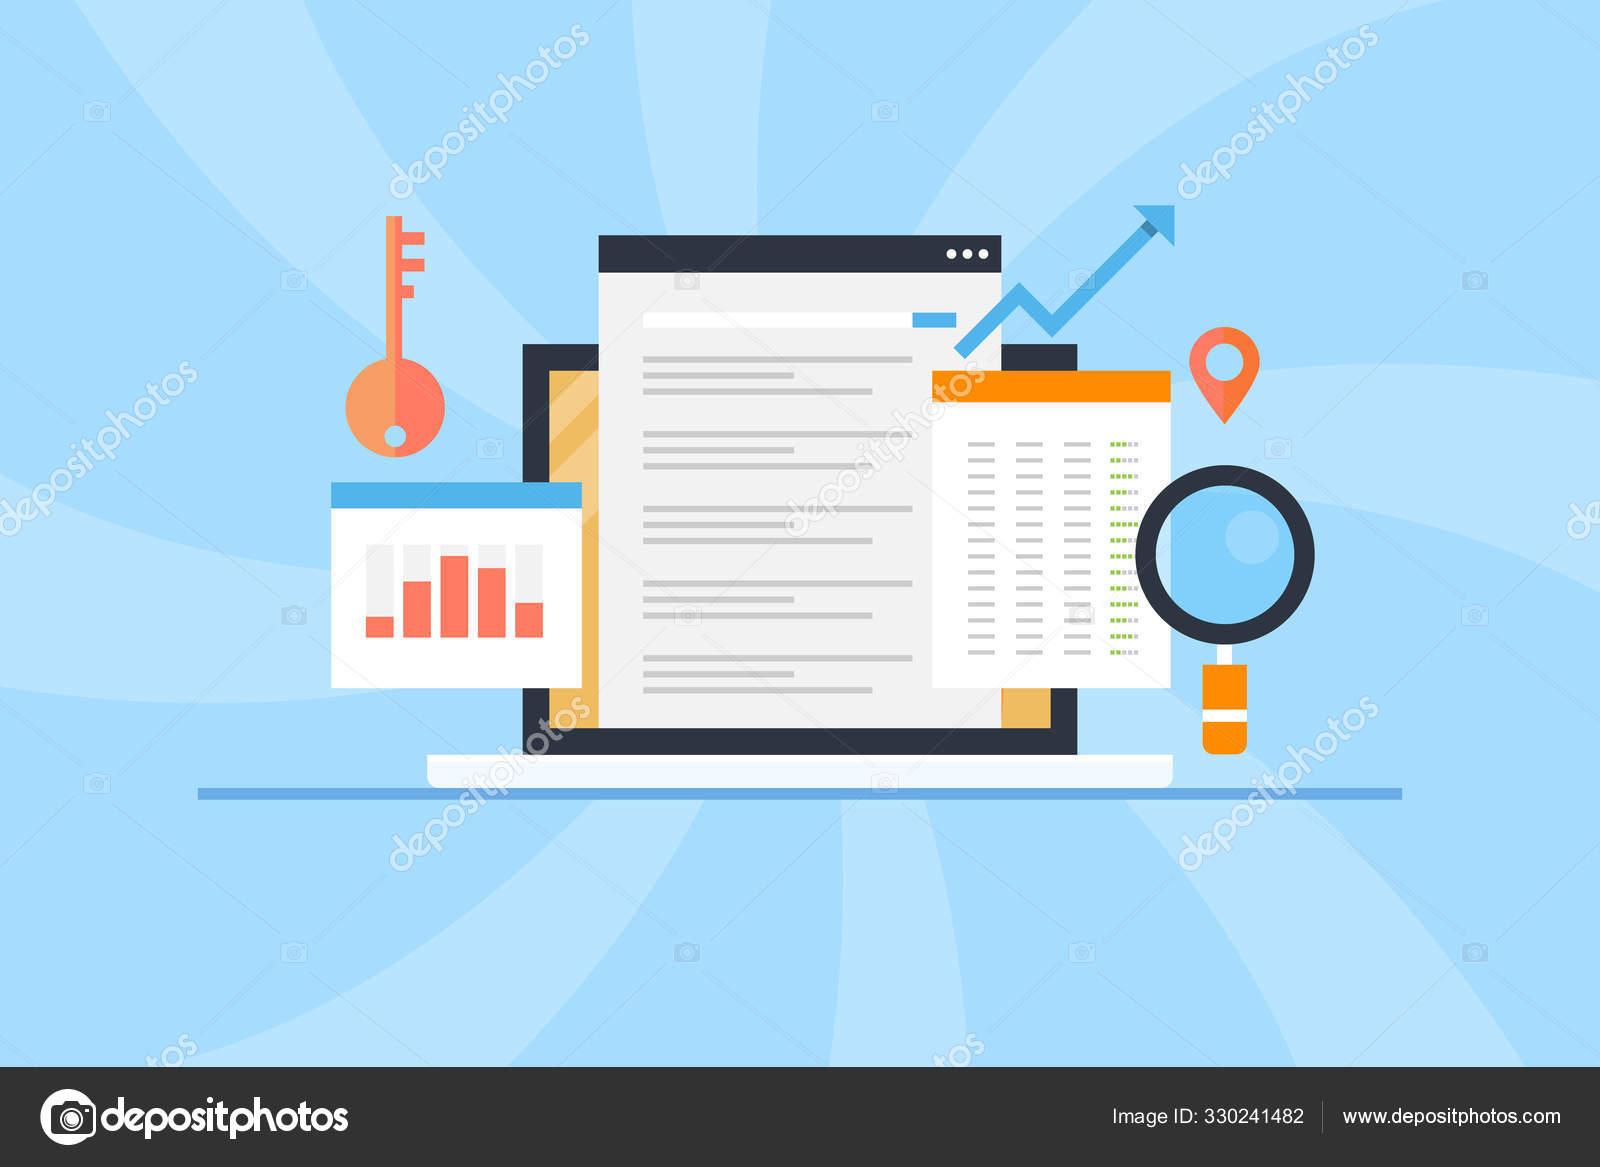 Search Engine Optimization Seo Keyword Research Website Page Analysis Digital Vector Image By C Sammby Vector Stock